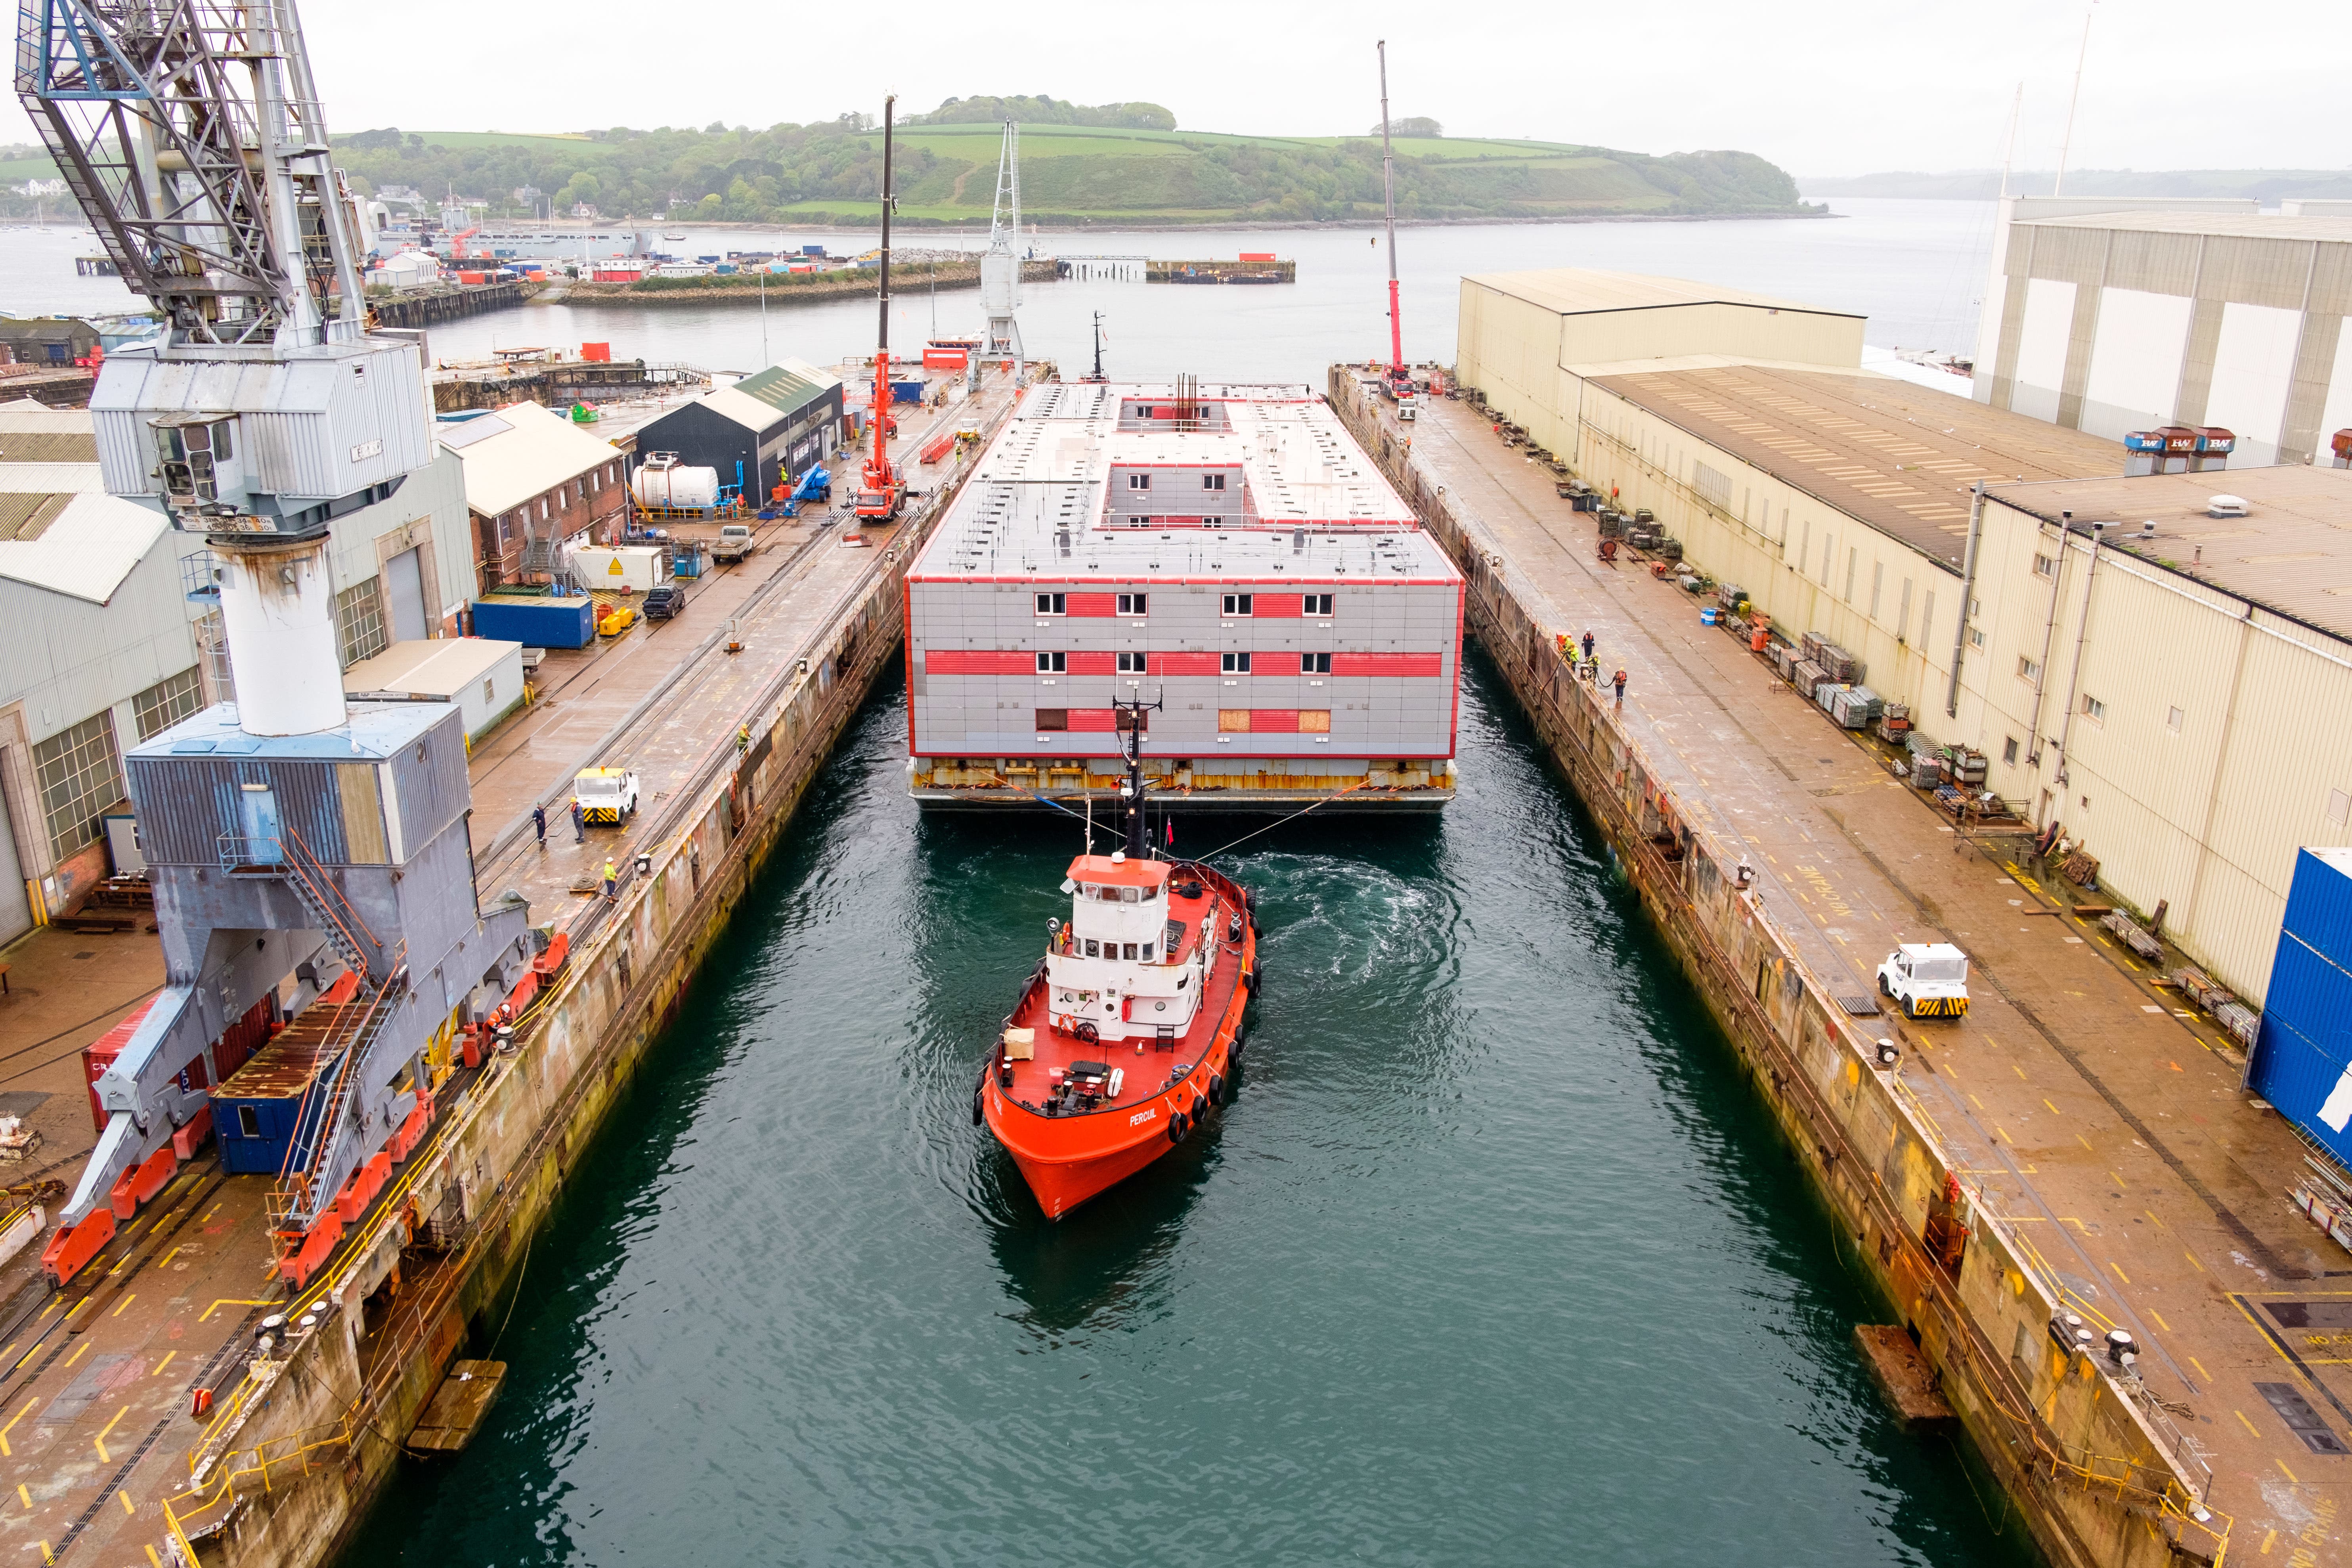 The Bibby Stockholm accommodation barge arrives into Falmouth docks in Cornwall (PA)